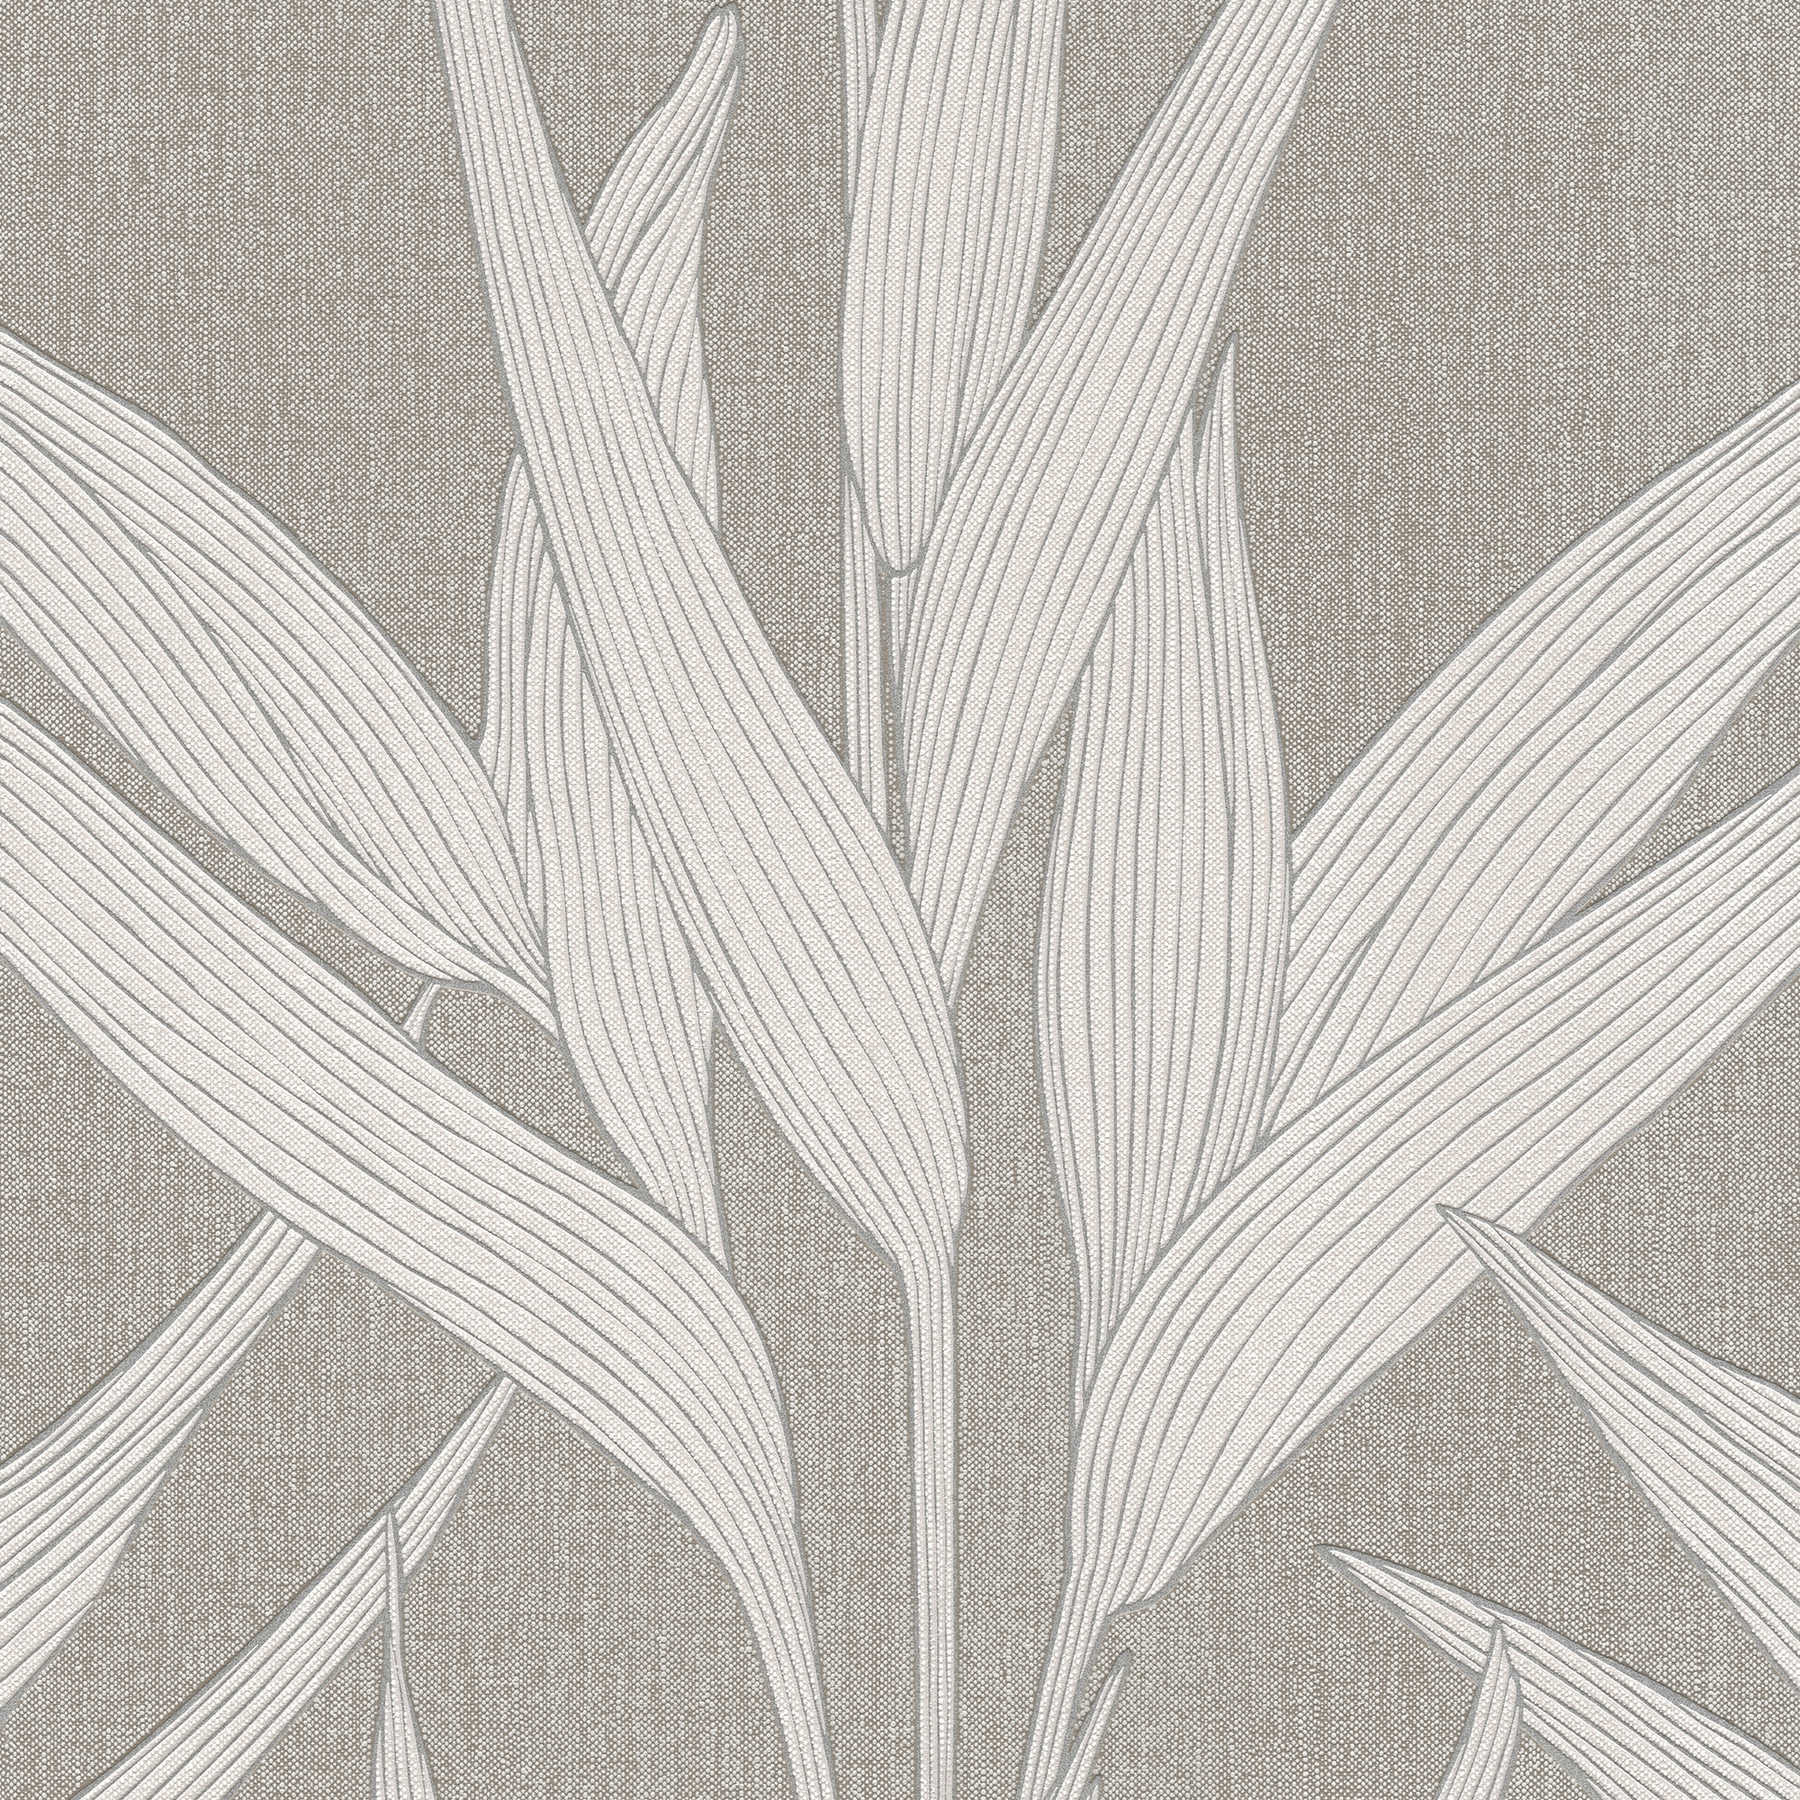 Linen look wallpaper with natural leaves design - brown
